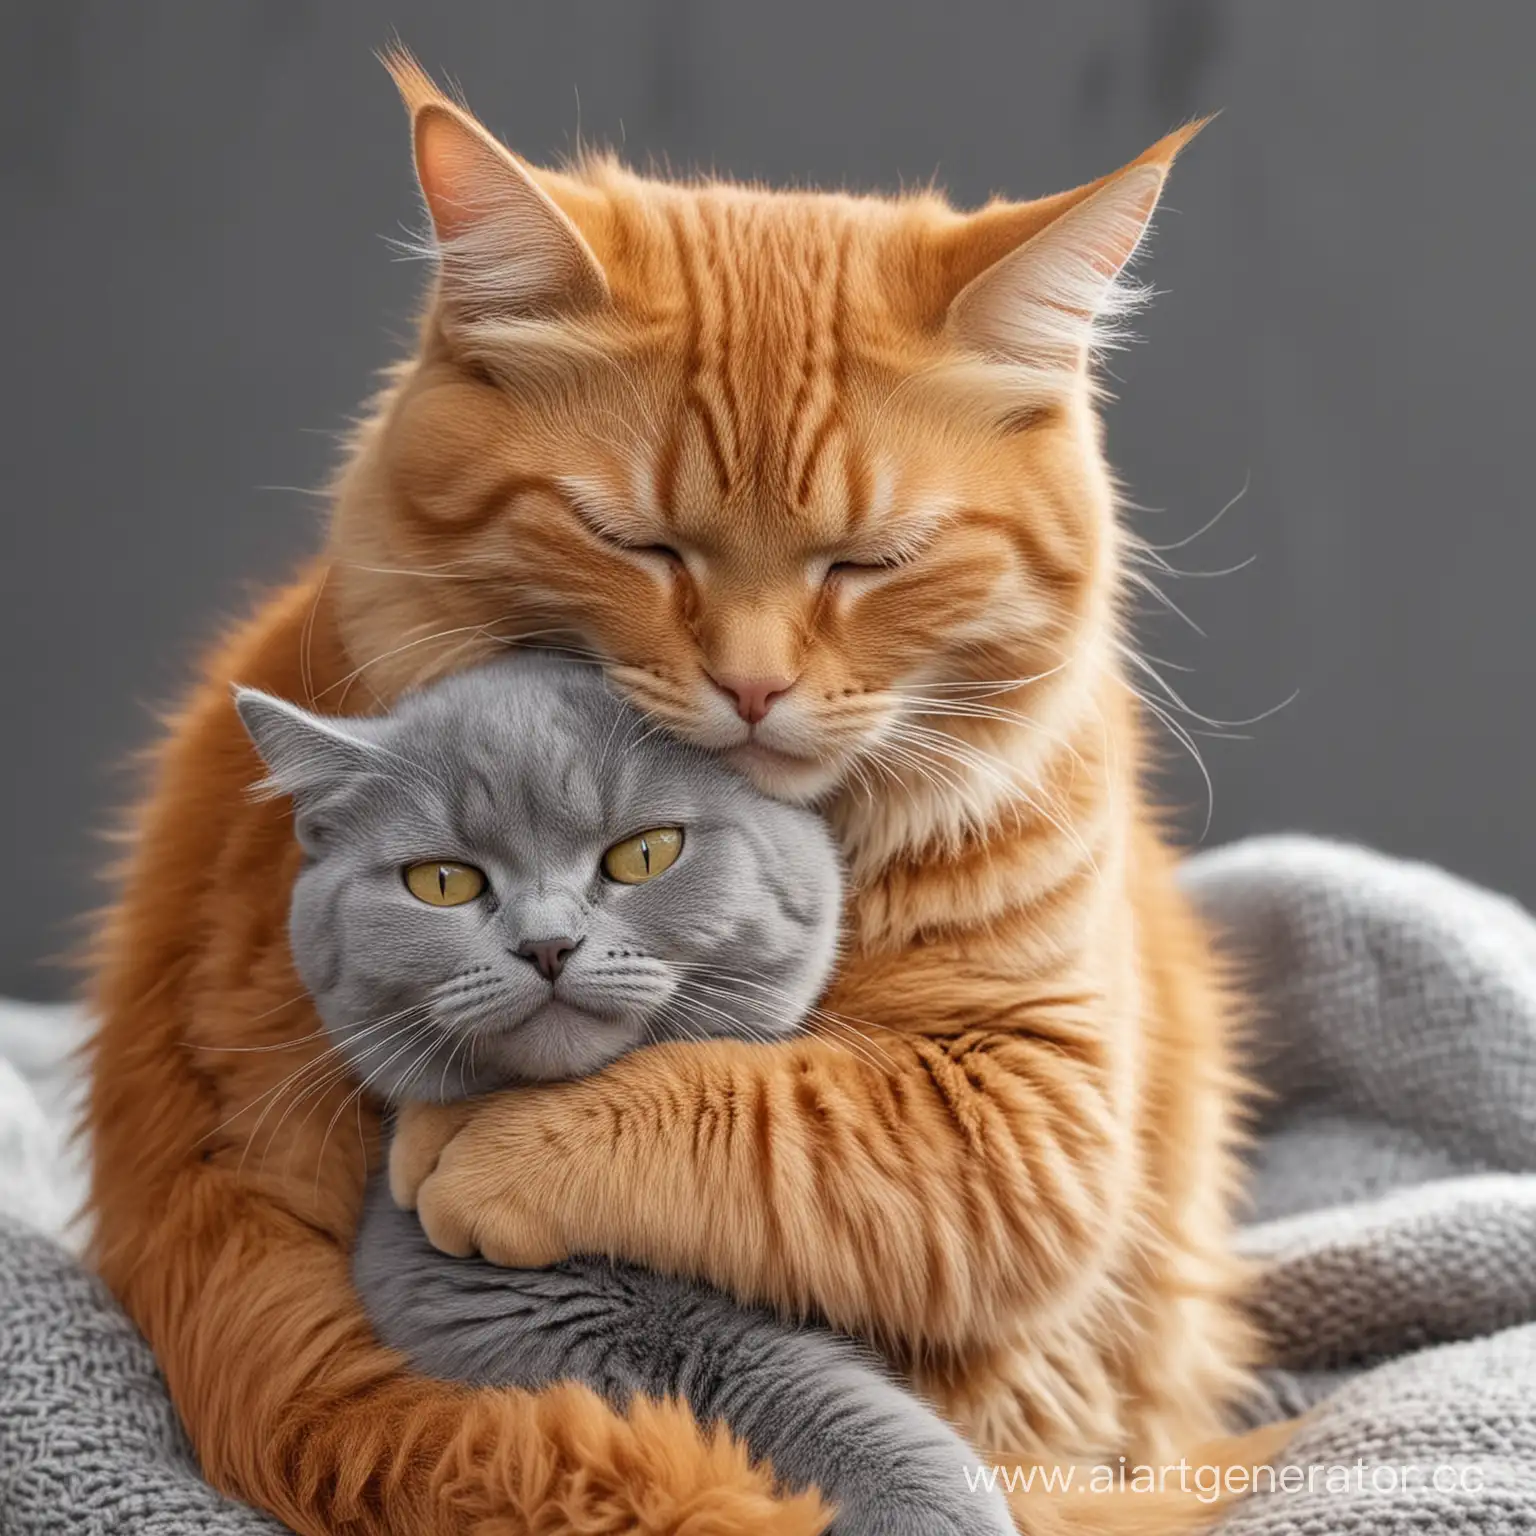 Affectionate-Gray-Cat-Embraces-Ginger-Cat